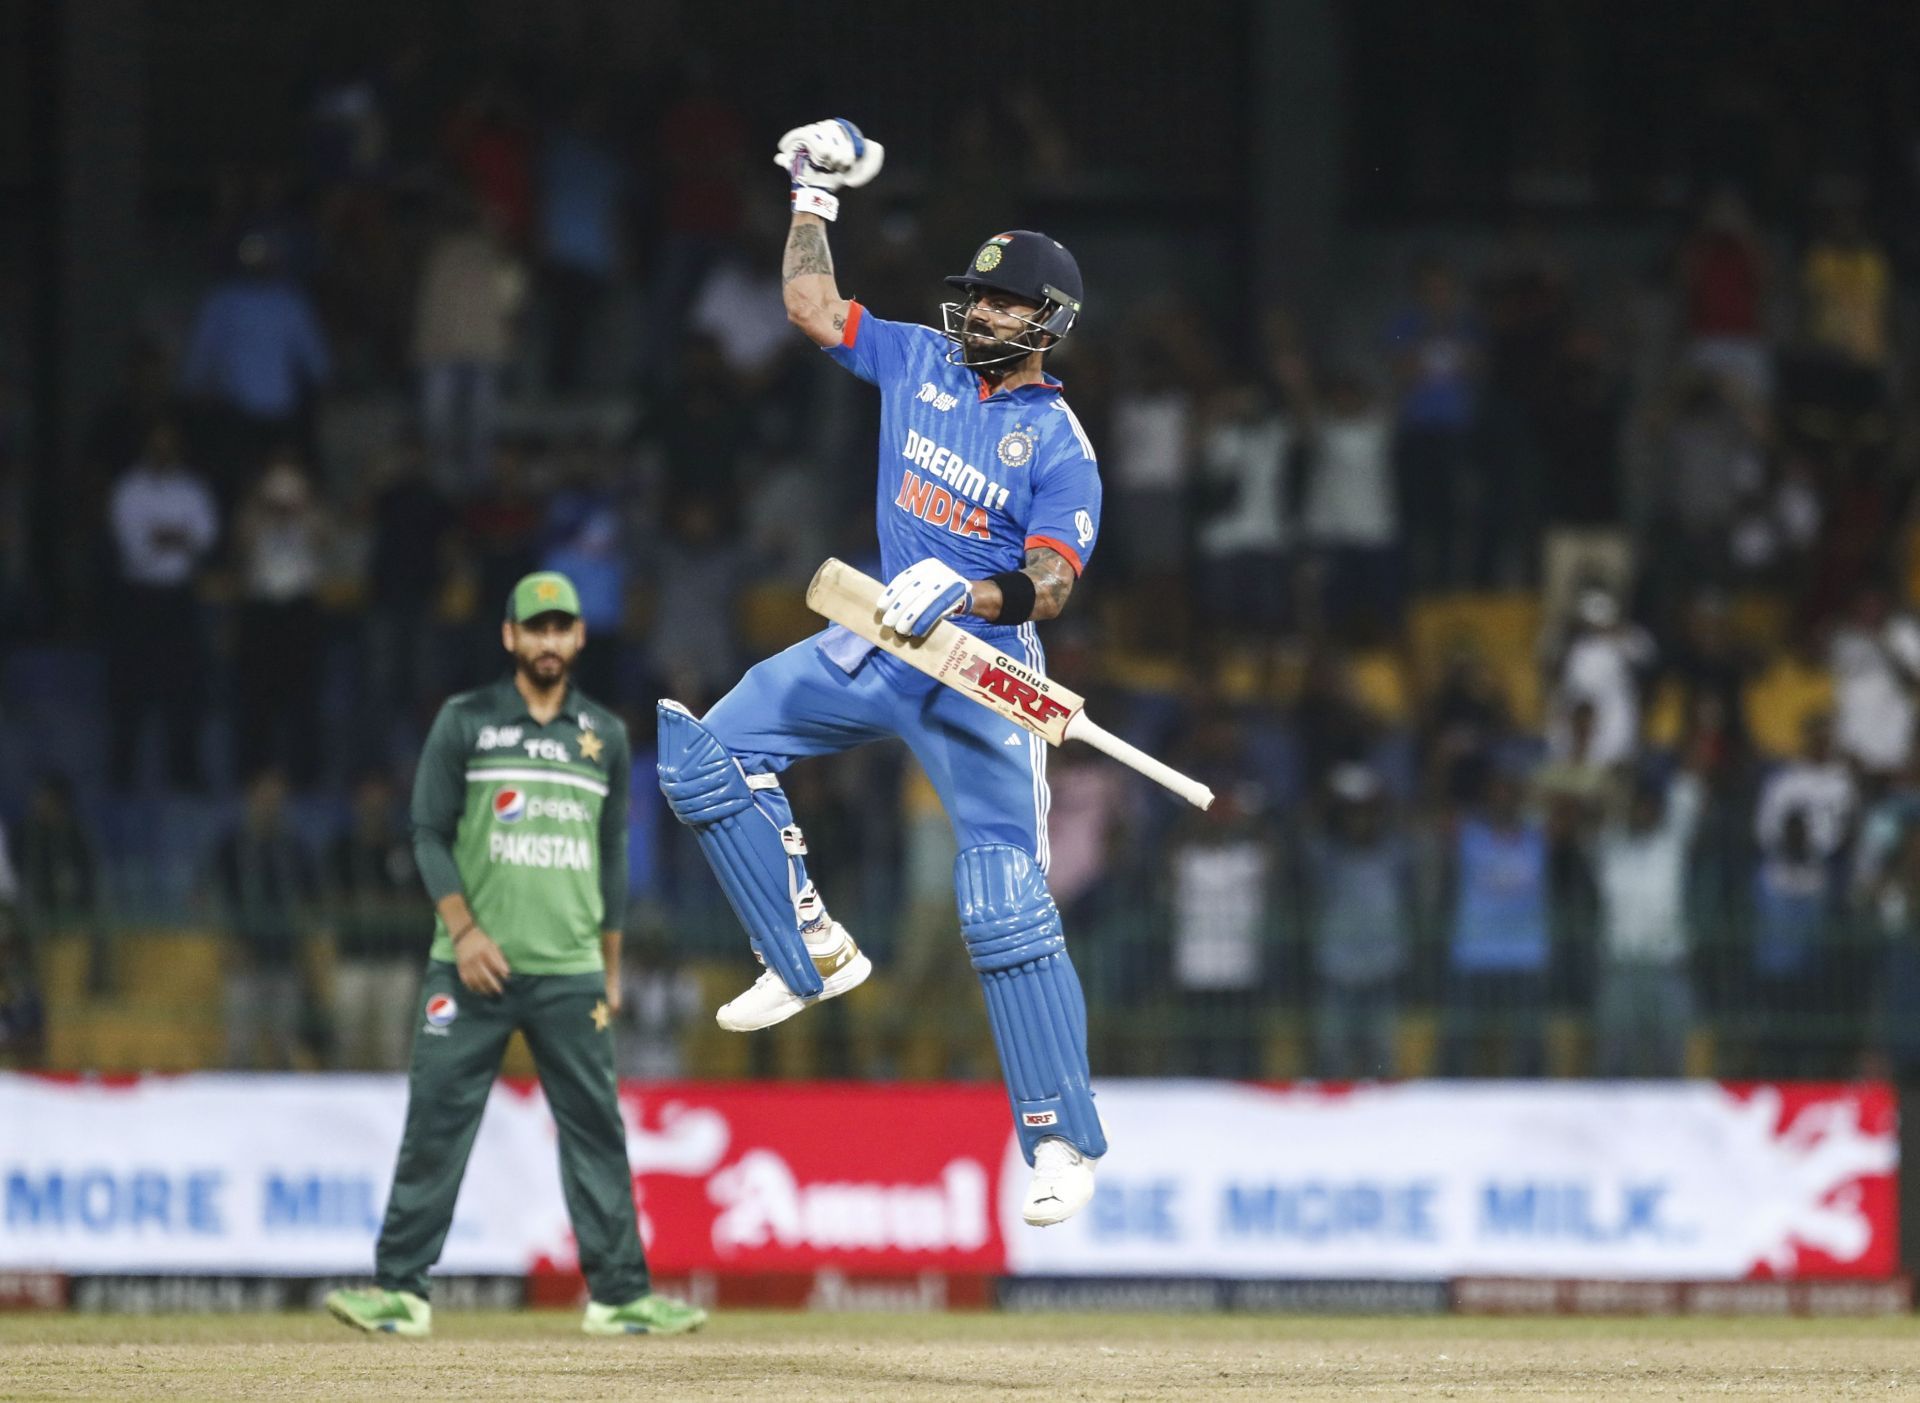 Virat Kohli celebrates his hundred runs during the Asia Cup match against Pakistan in Colombo. (Pic: AP Photo)